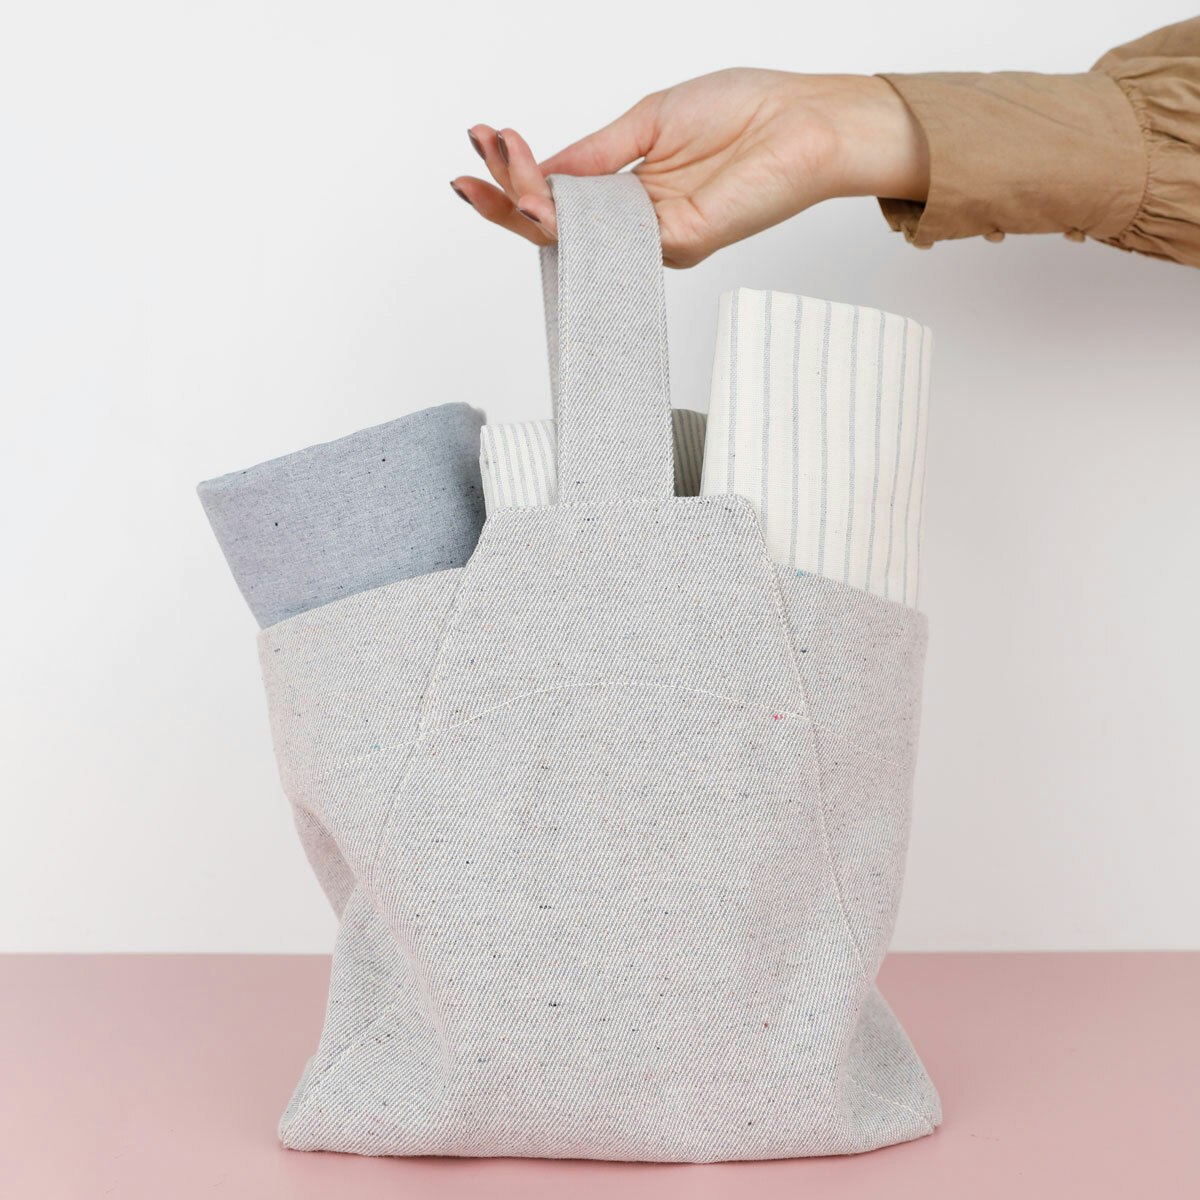 SQ Hand TYTKA Triangular Foldable Tote Pumice Speckle Upcycled Cotton